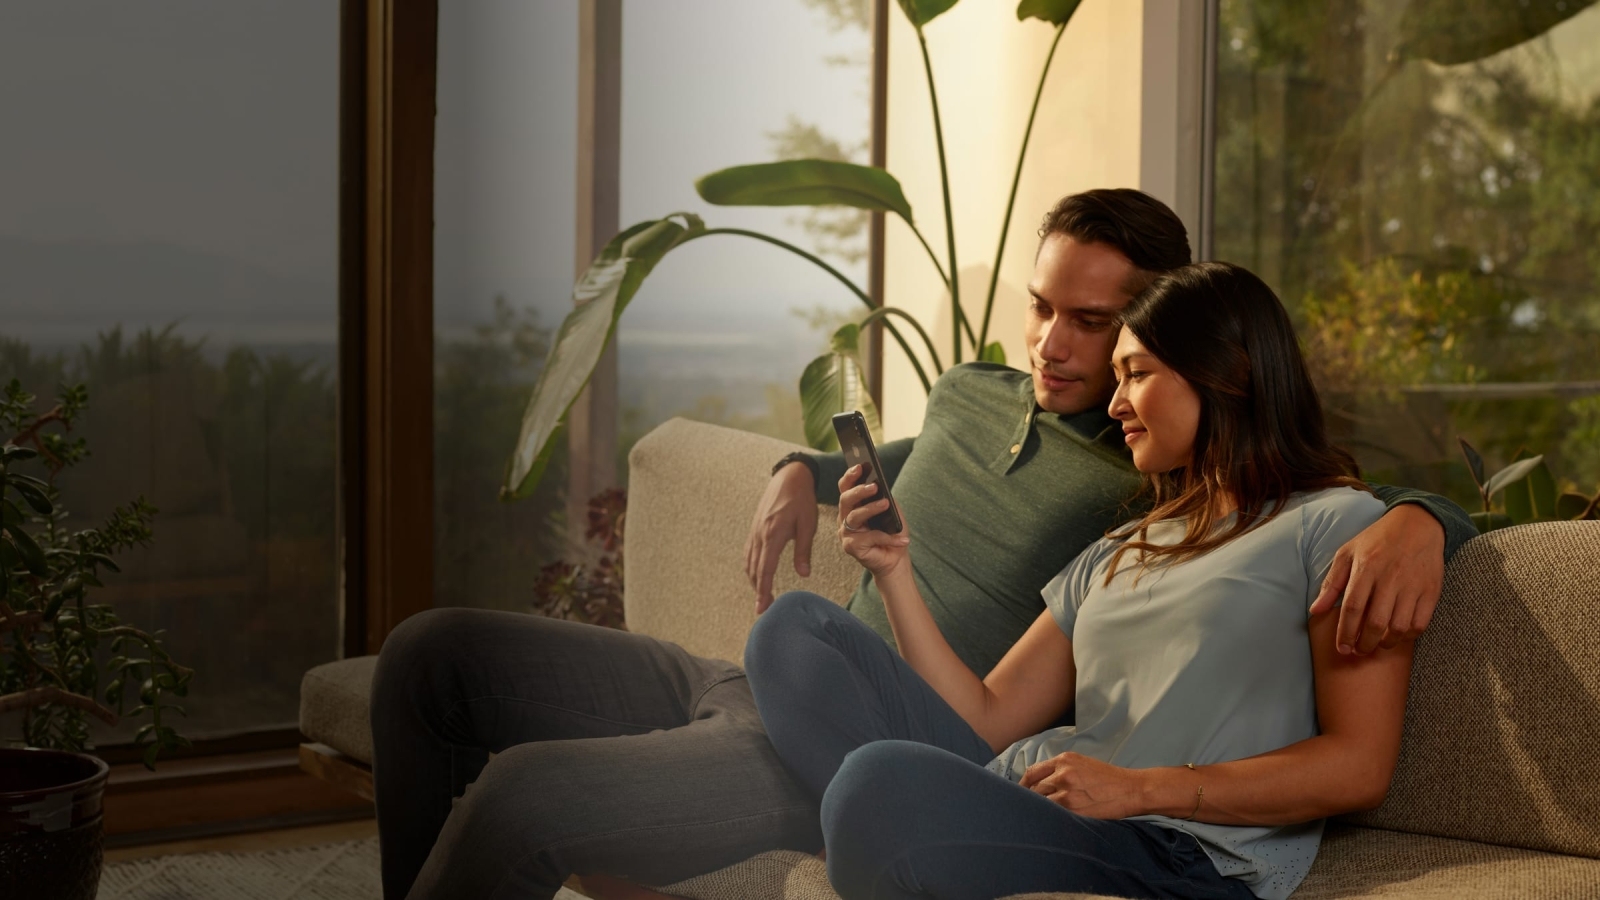 Man and woman sitting on the couch looking at a smart phone